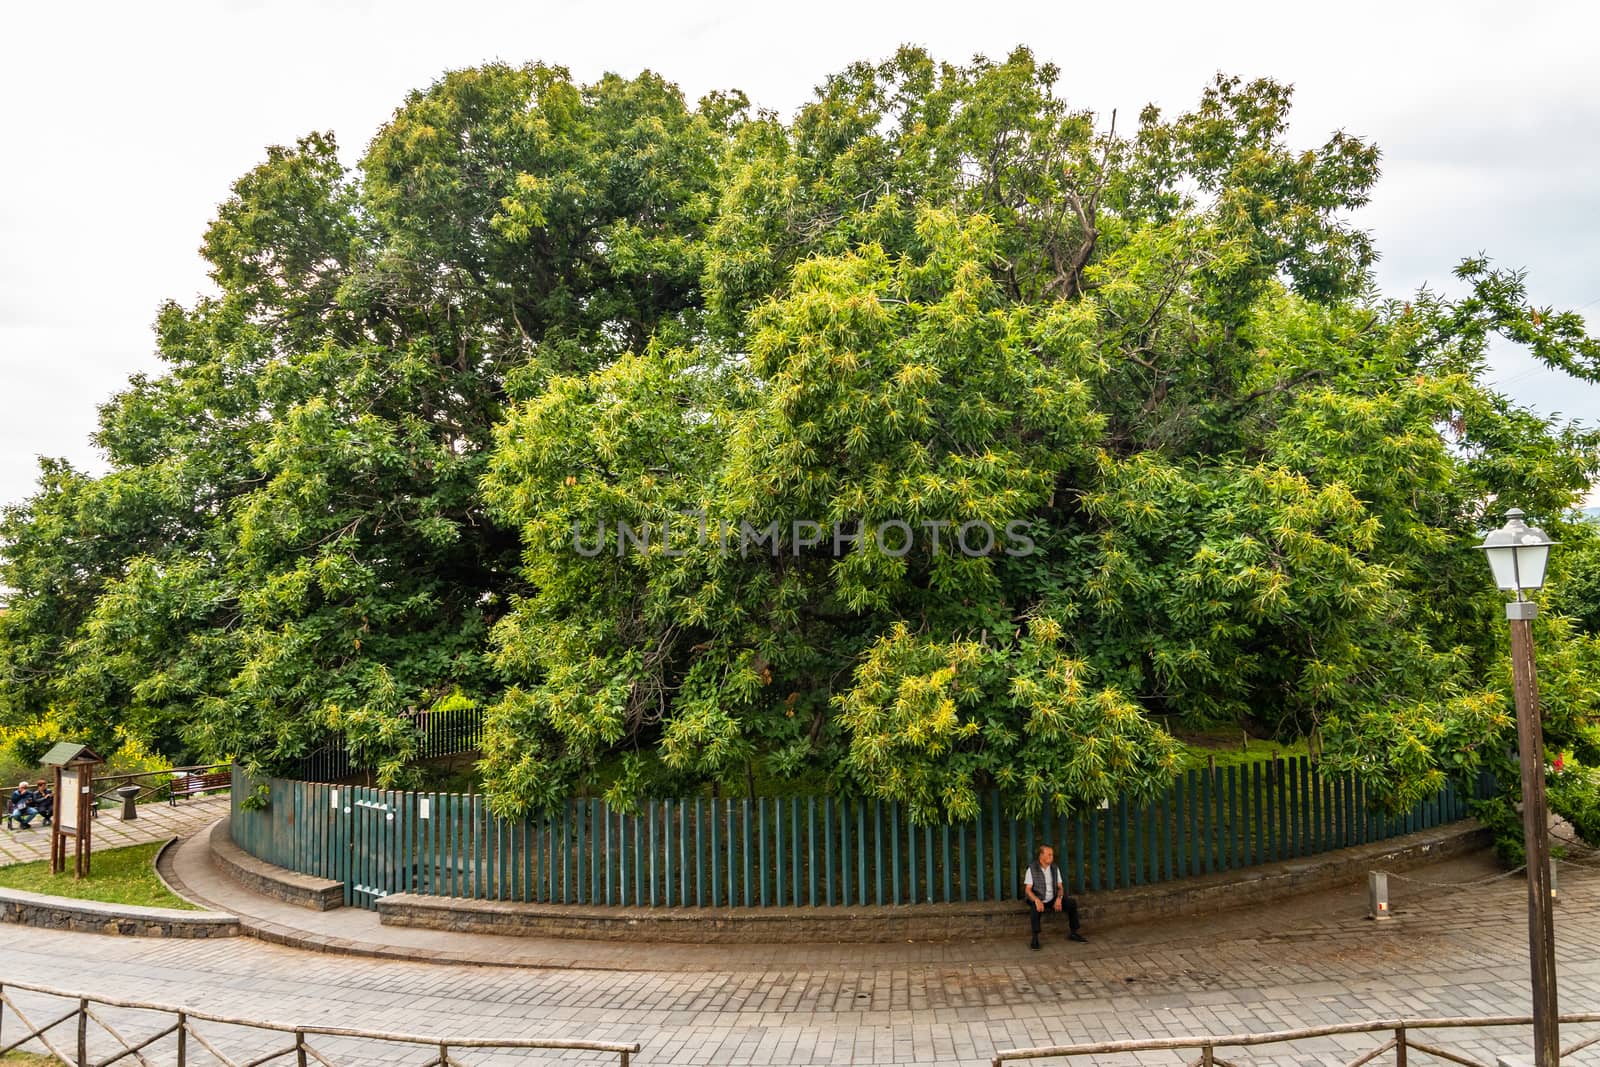 The Hundred-Horse Chestnut in Sant'Alfio, Catania, Sicily by mauricallari